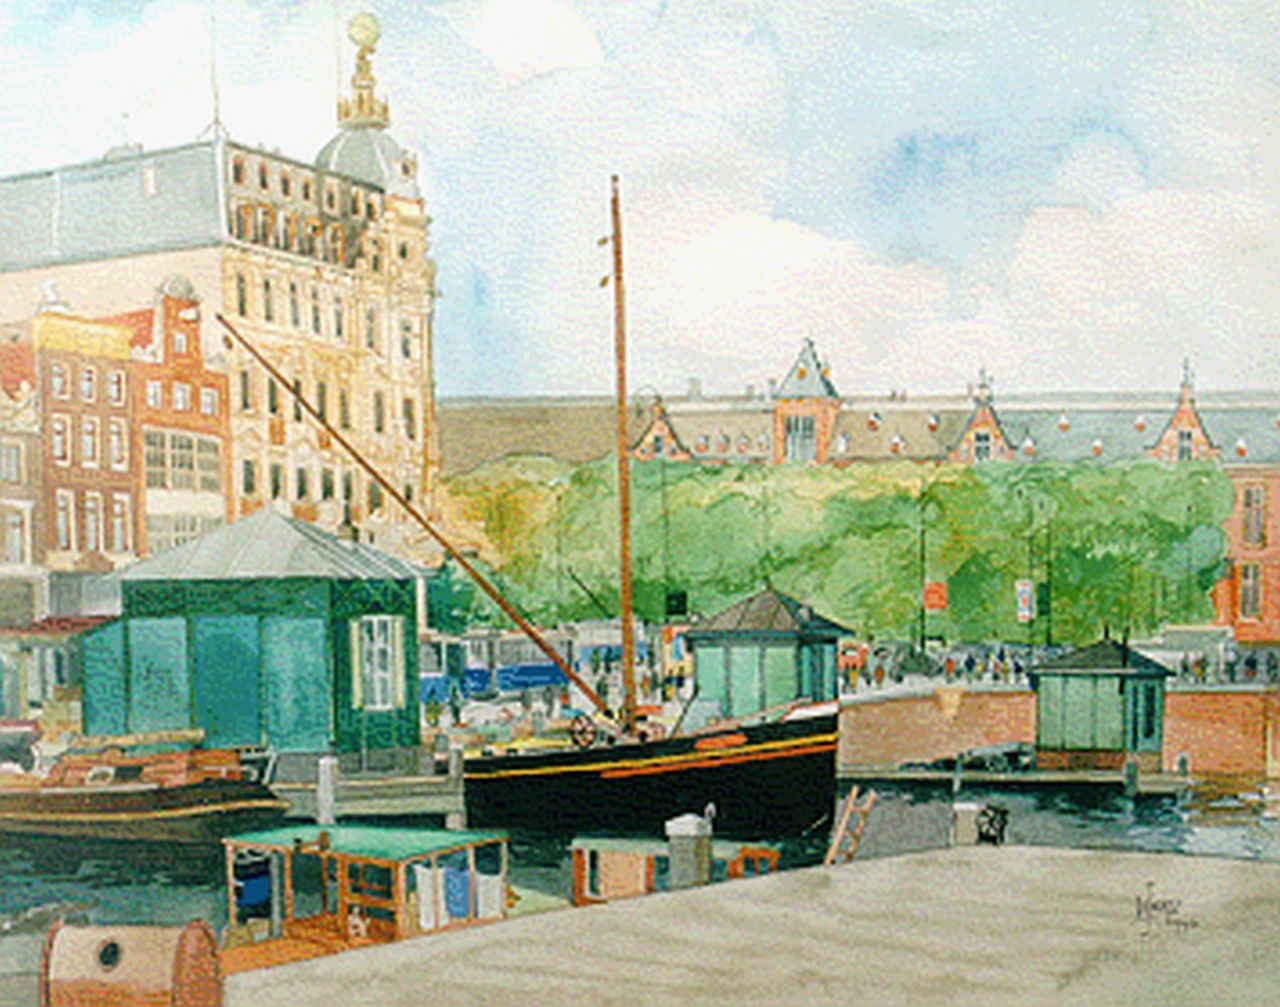 Wiertz H.L.  | Henri Louis 'Joub' Wiertz, View of the Central Station, Amsterdam, watercolour on paper 38.0 x 48.0 cm, signed l.r. and dated 1946